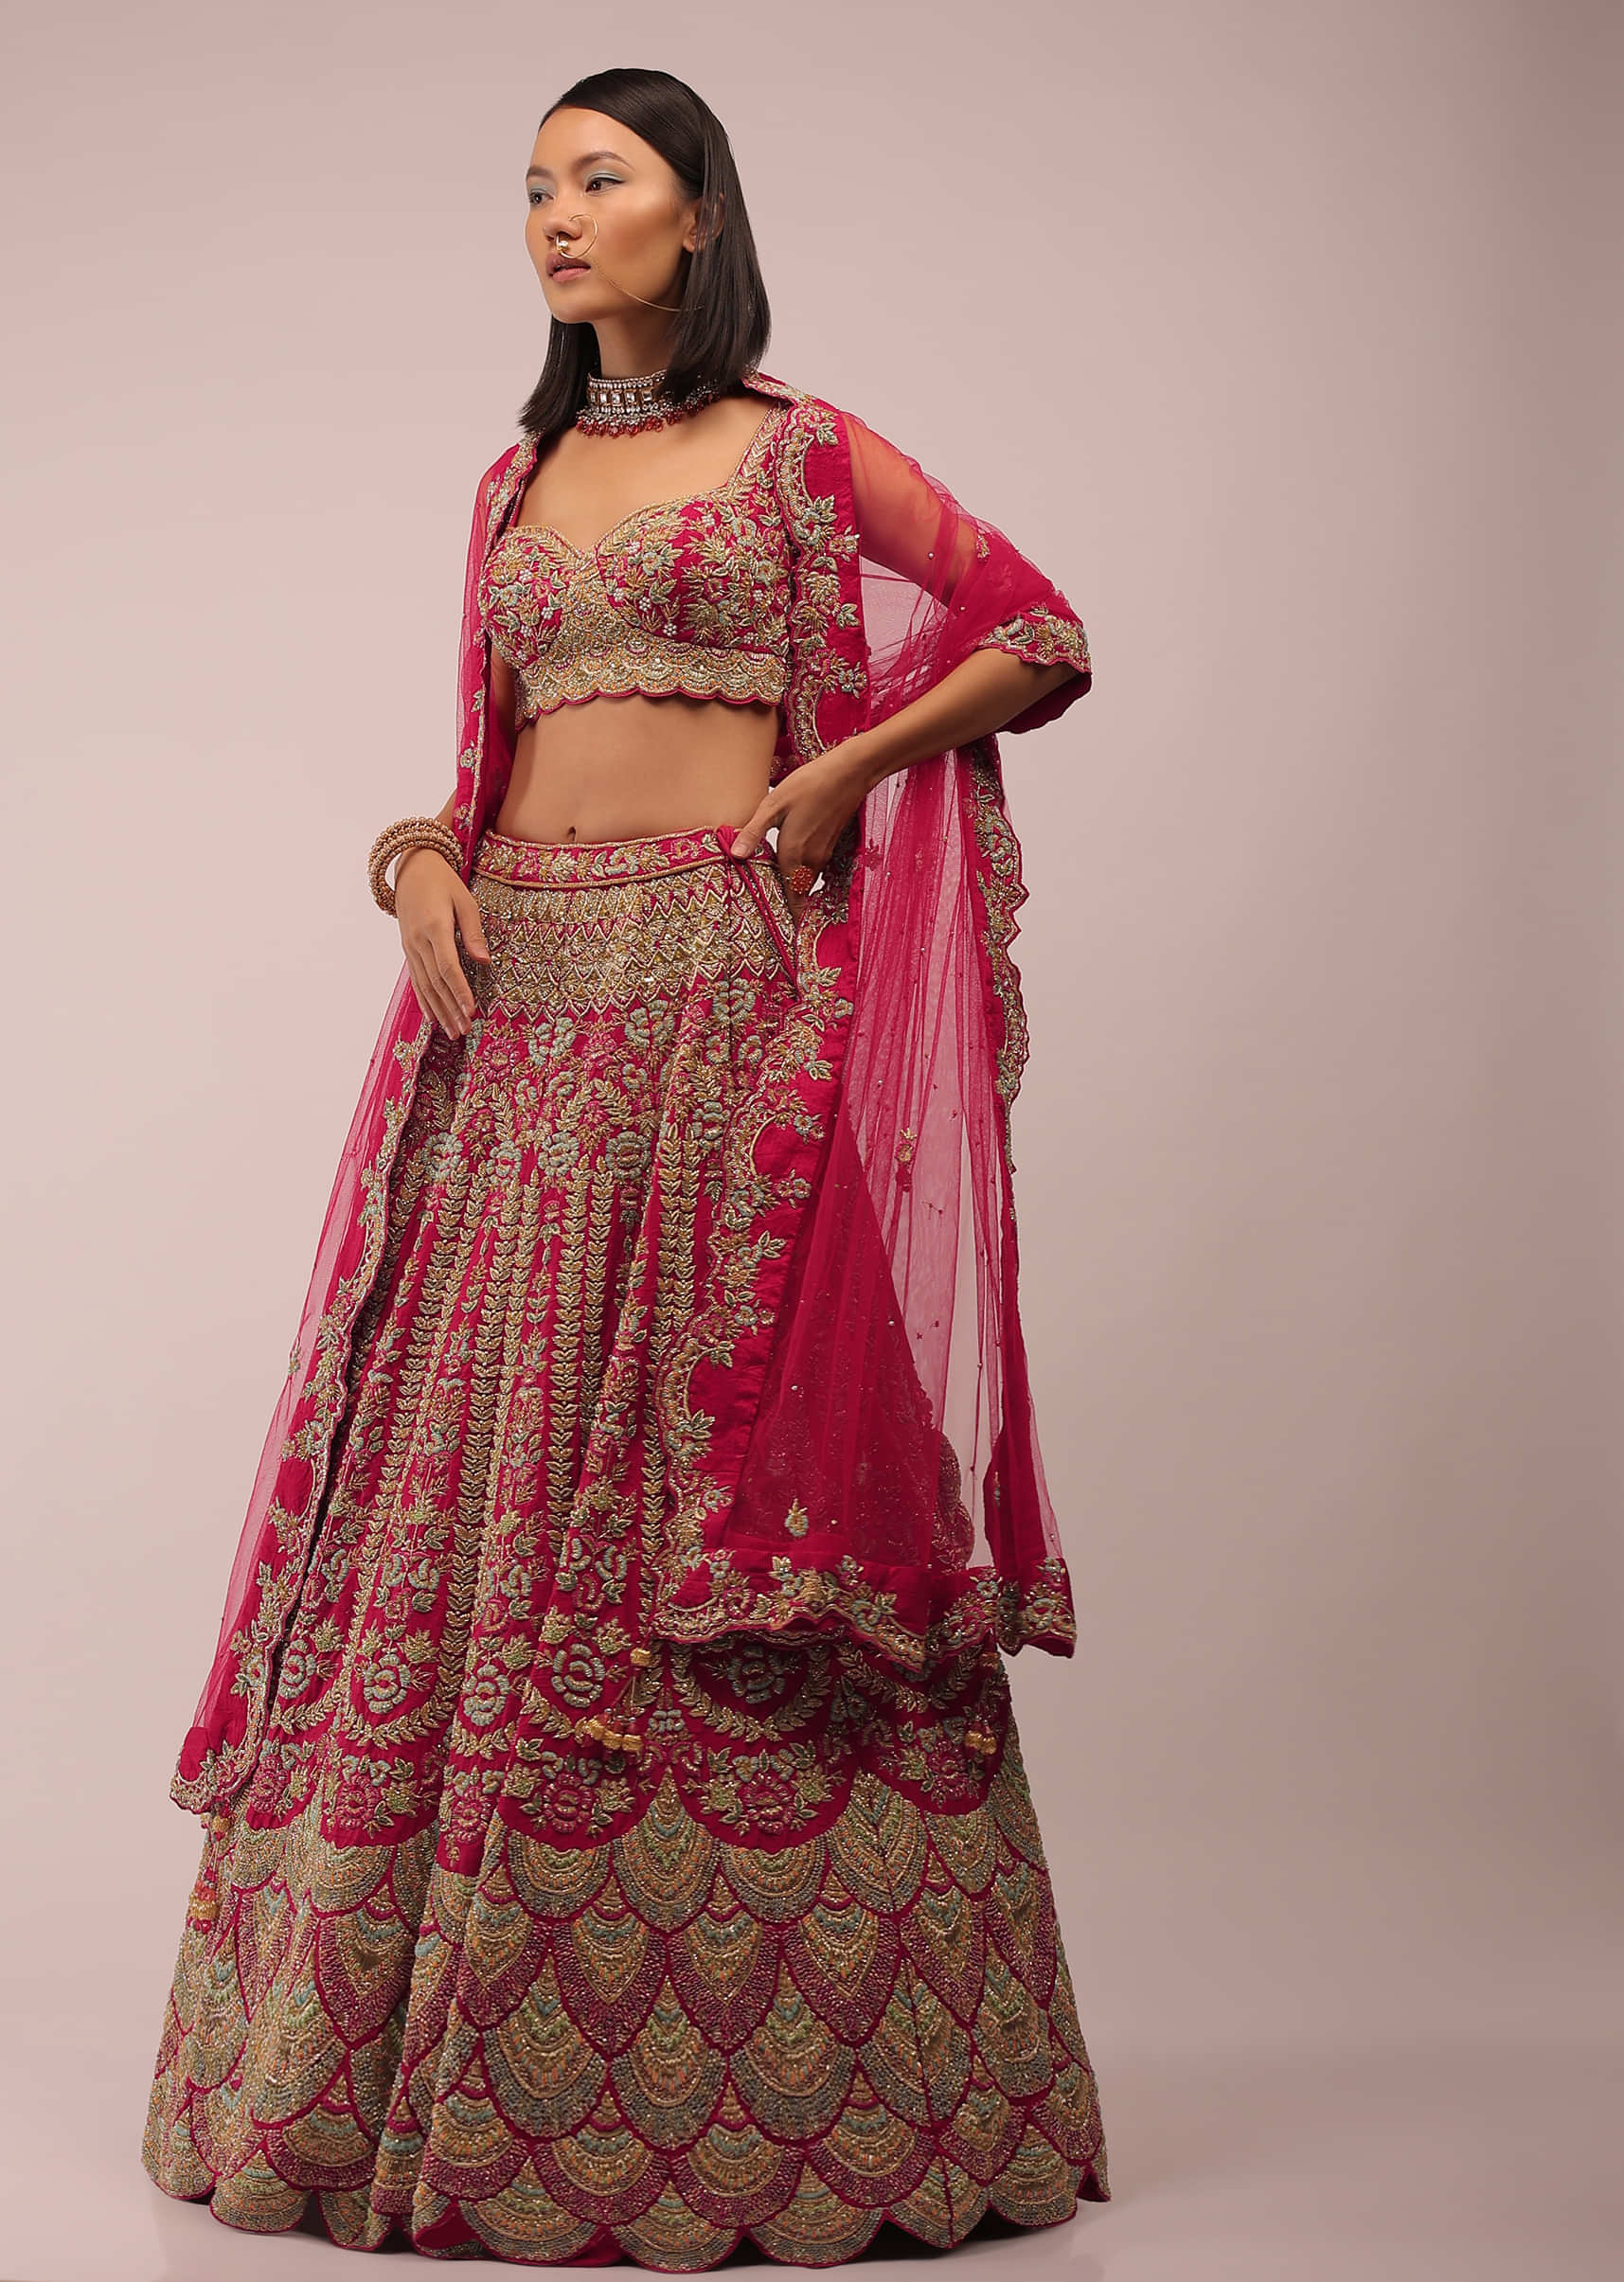 Rani Pink Lehenga In Mughal Inspired Architecture Embroidery In Kalidar Motifs,Crafted In Raw Silk With Multi Color Beads,And Zardozi In Scallops